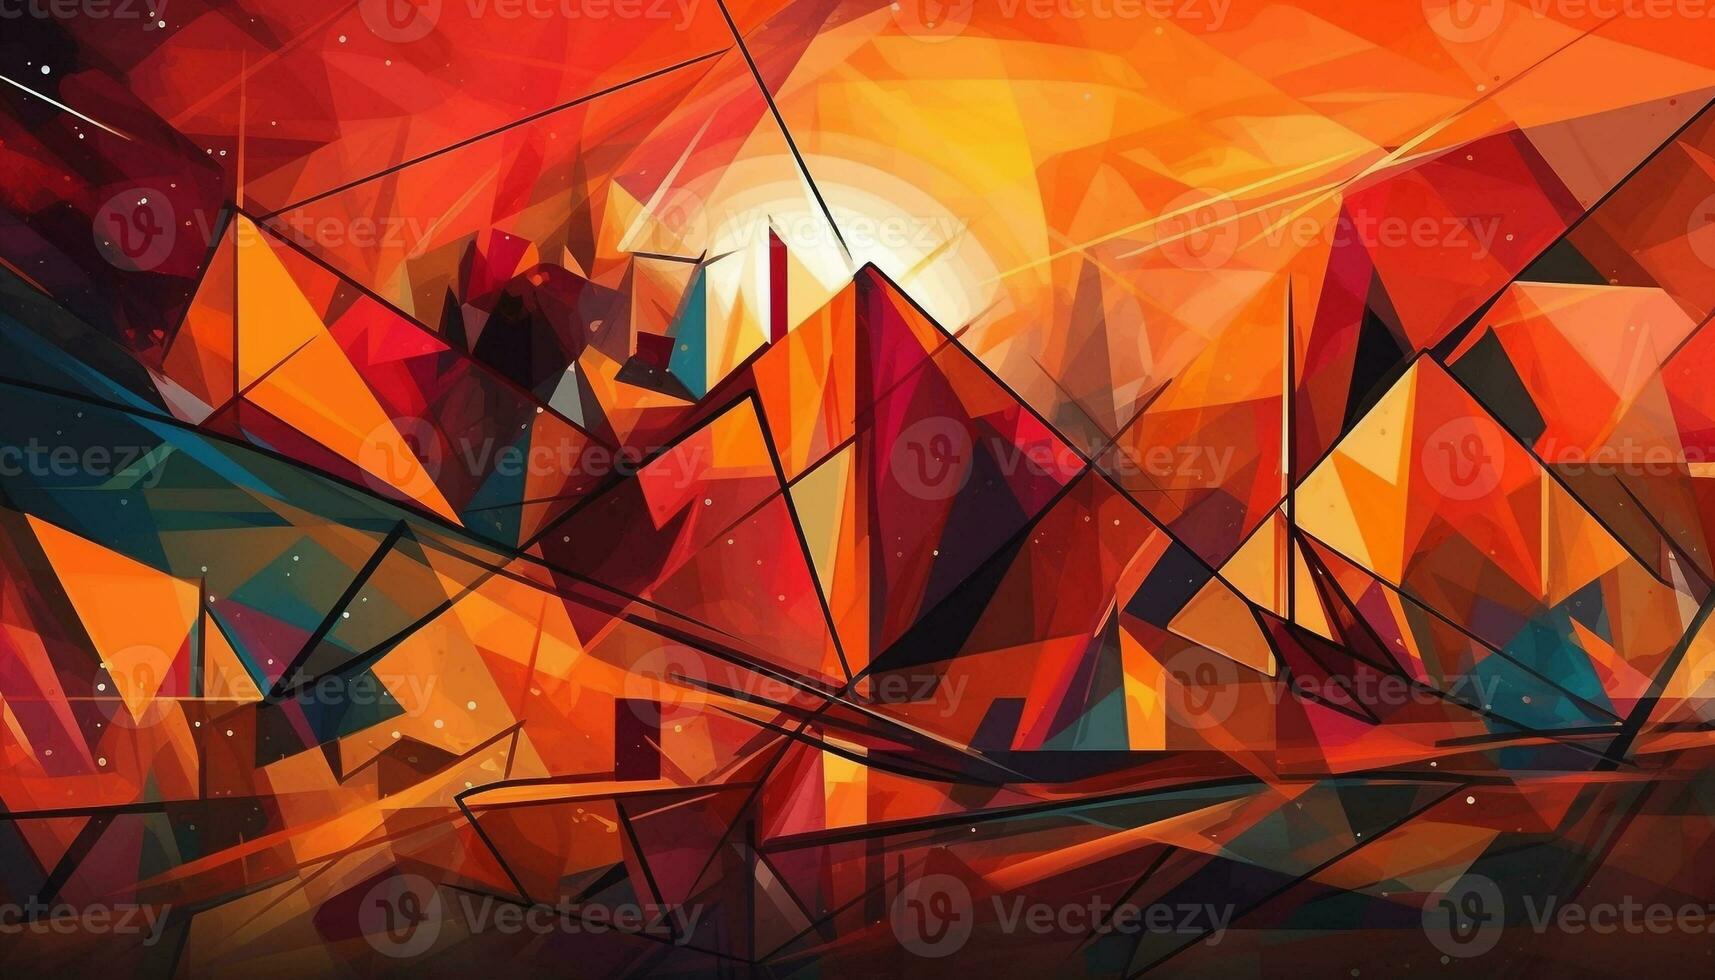 Geometric shapes in vibrant colors create patterns generated by AI photo